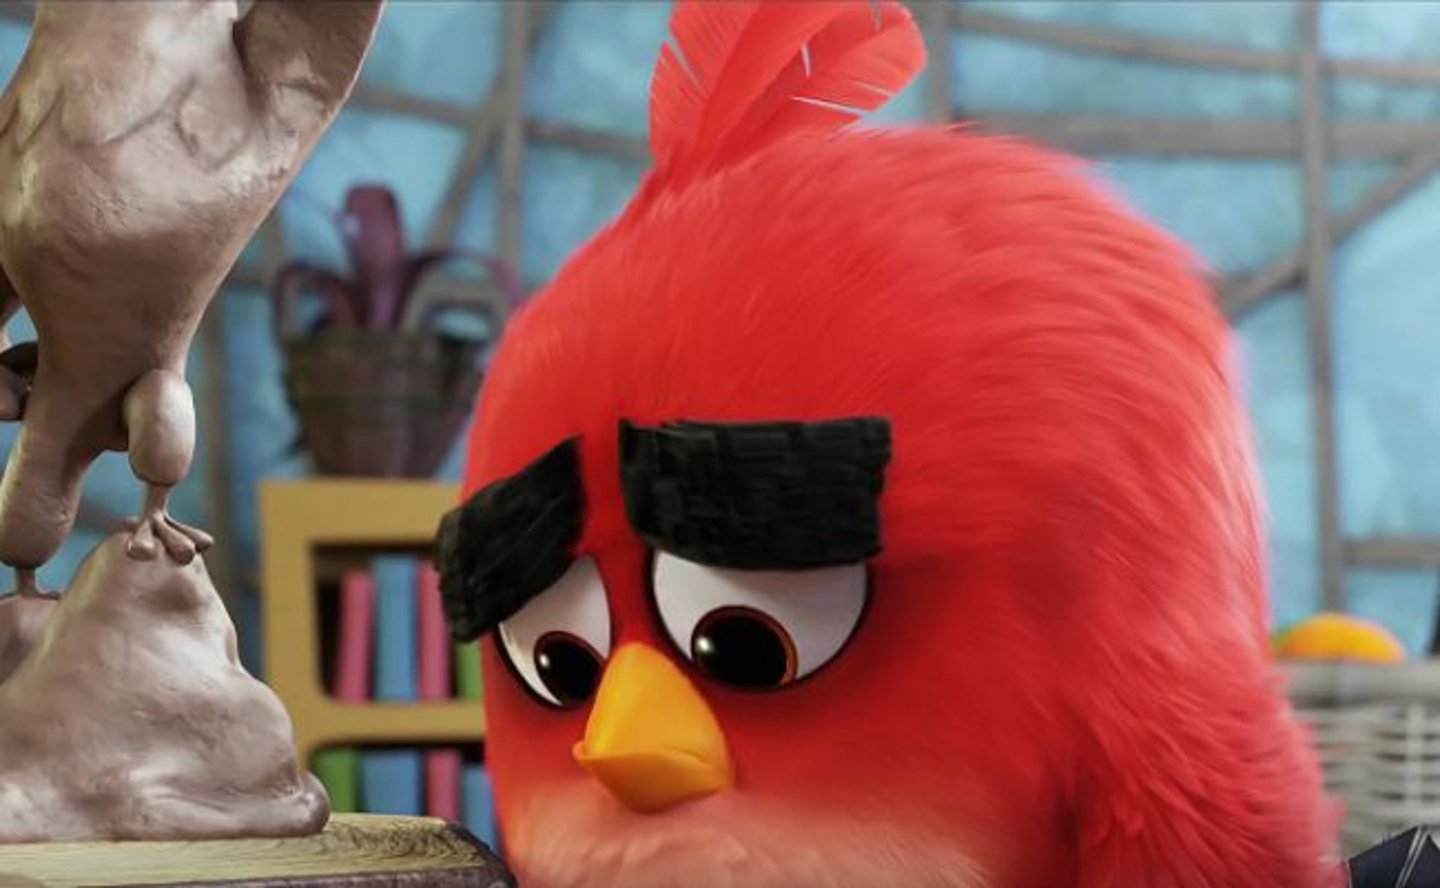 Red Angry Birds